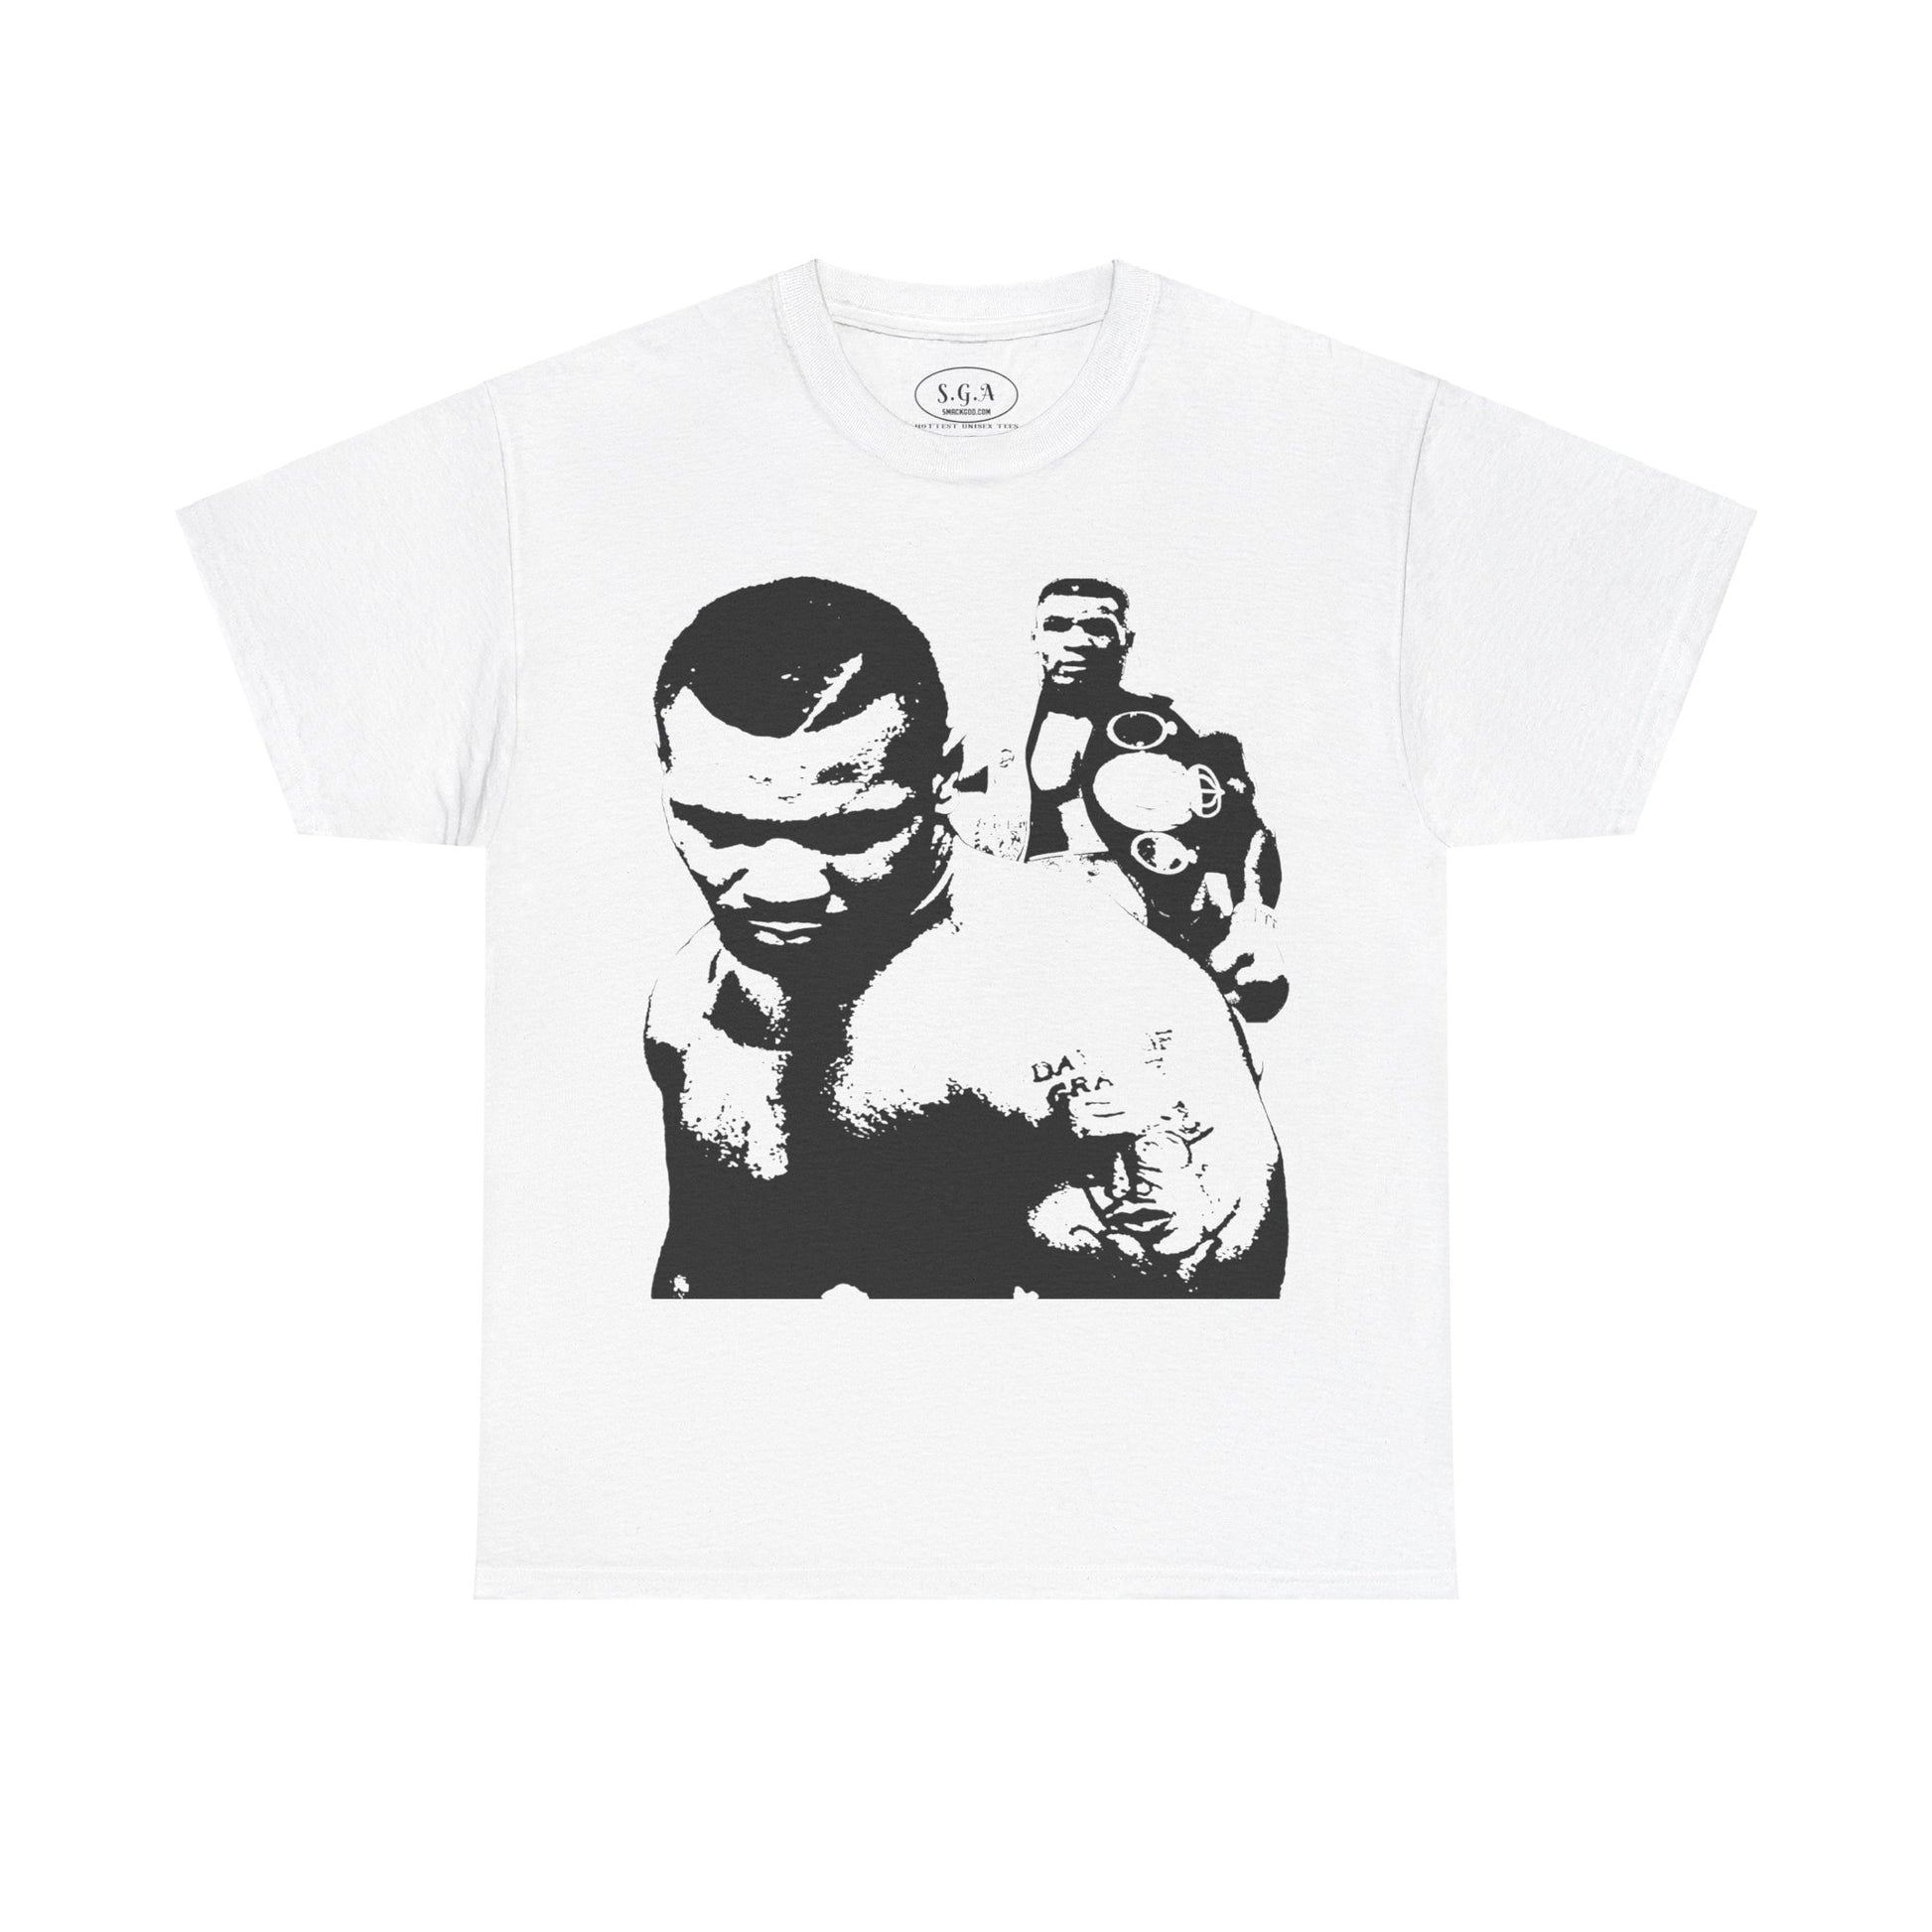 "Discover our exclusive Mike Tyson T-Shirt, featuring a bold graphic design that pays homage to the legendary boxer. Crafted from premium cotton for comfort and durability. Perfect for boxing fans and sports enthusiasts. Shop now at Smack God Apparel!"